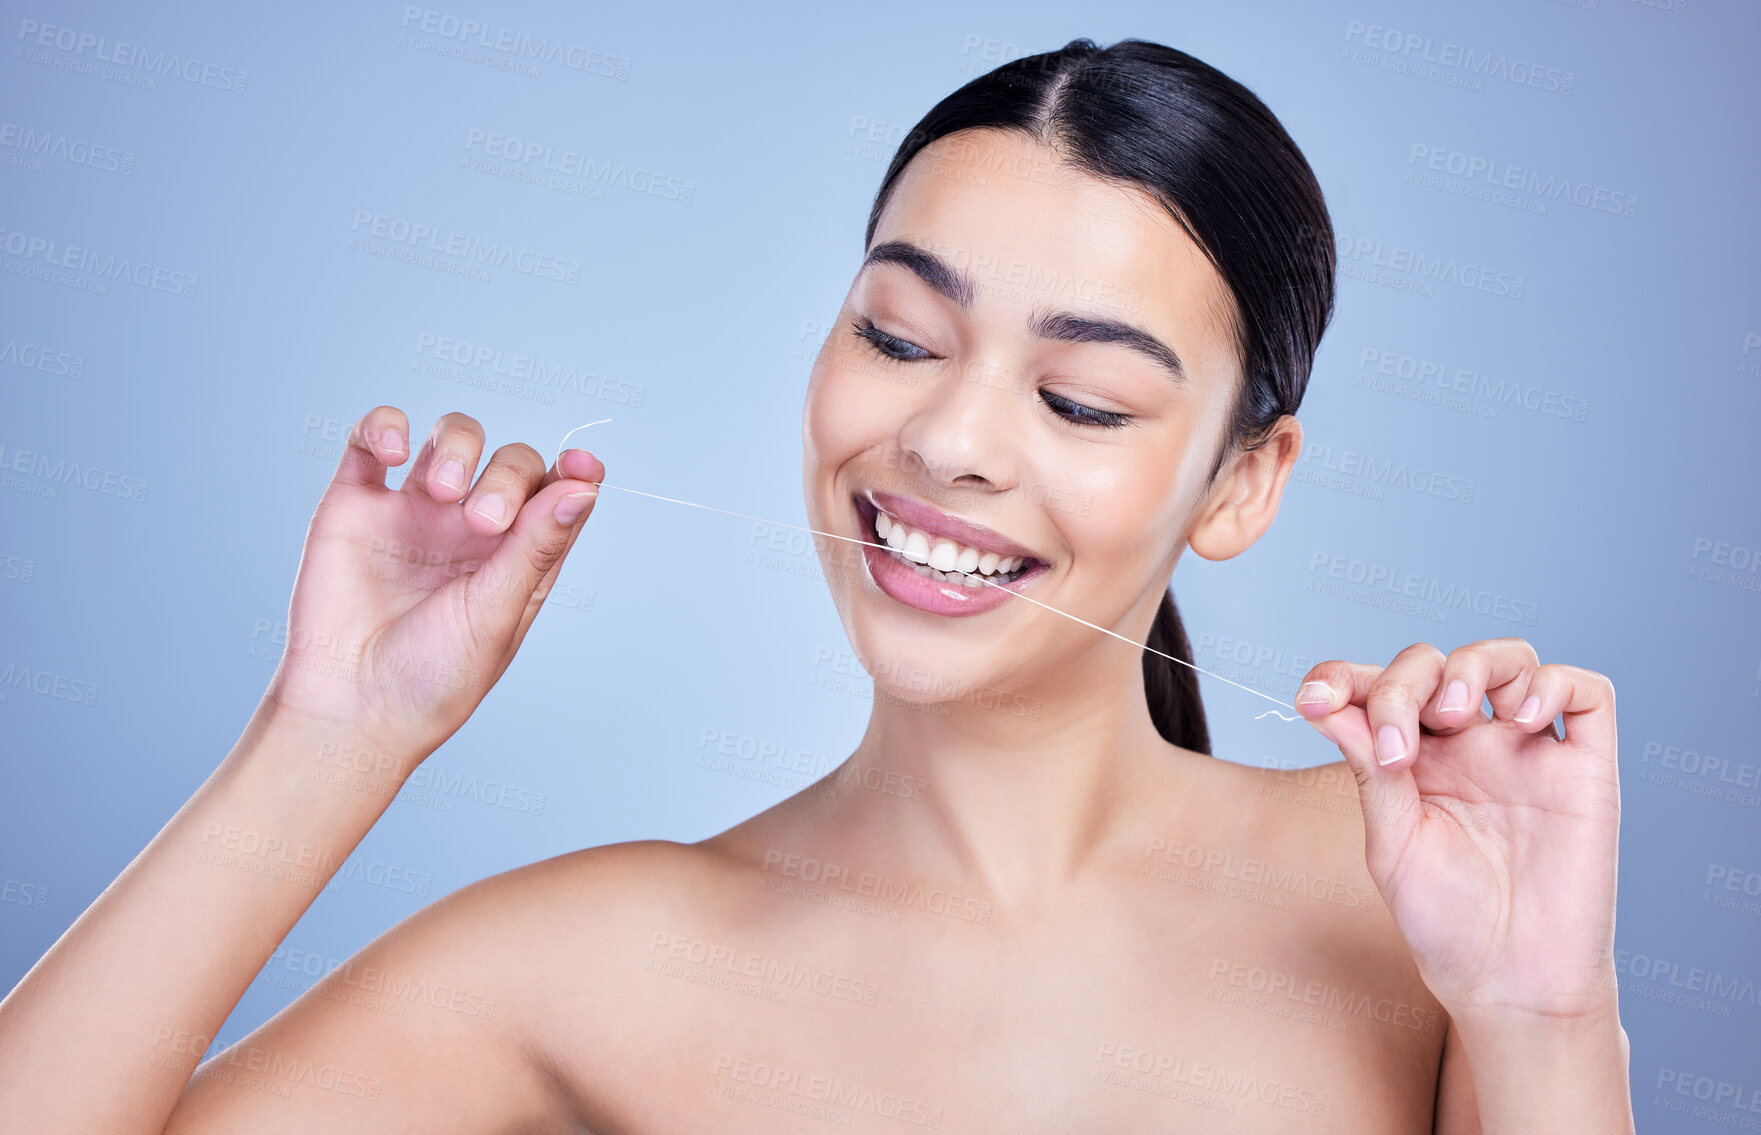 Buy stock photo A happy smiling mixed race young woman with glowing skin posing against blue copyspace background while flossing her teeth for fresh breath. Hispanic model using floss to prevent a cavity